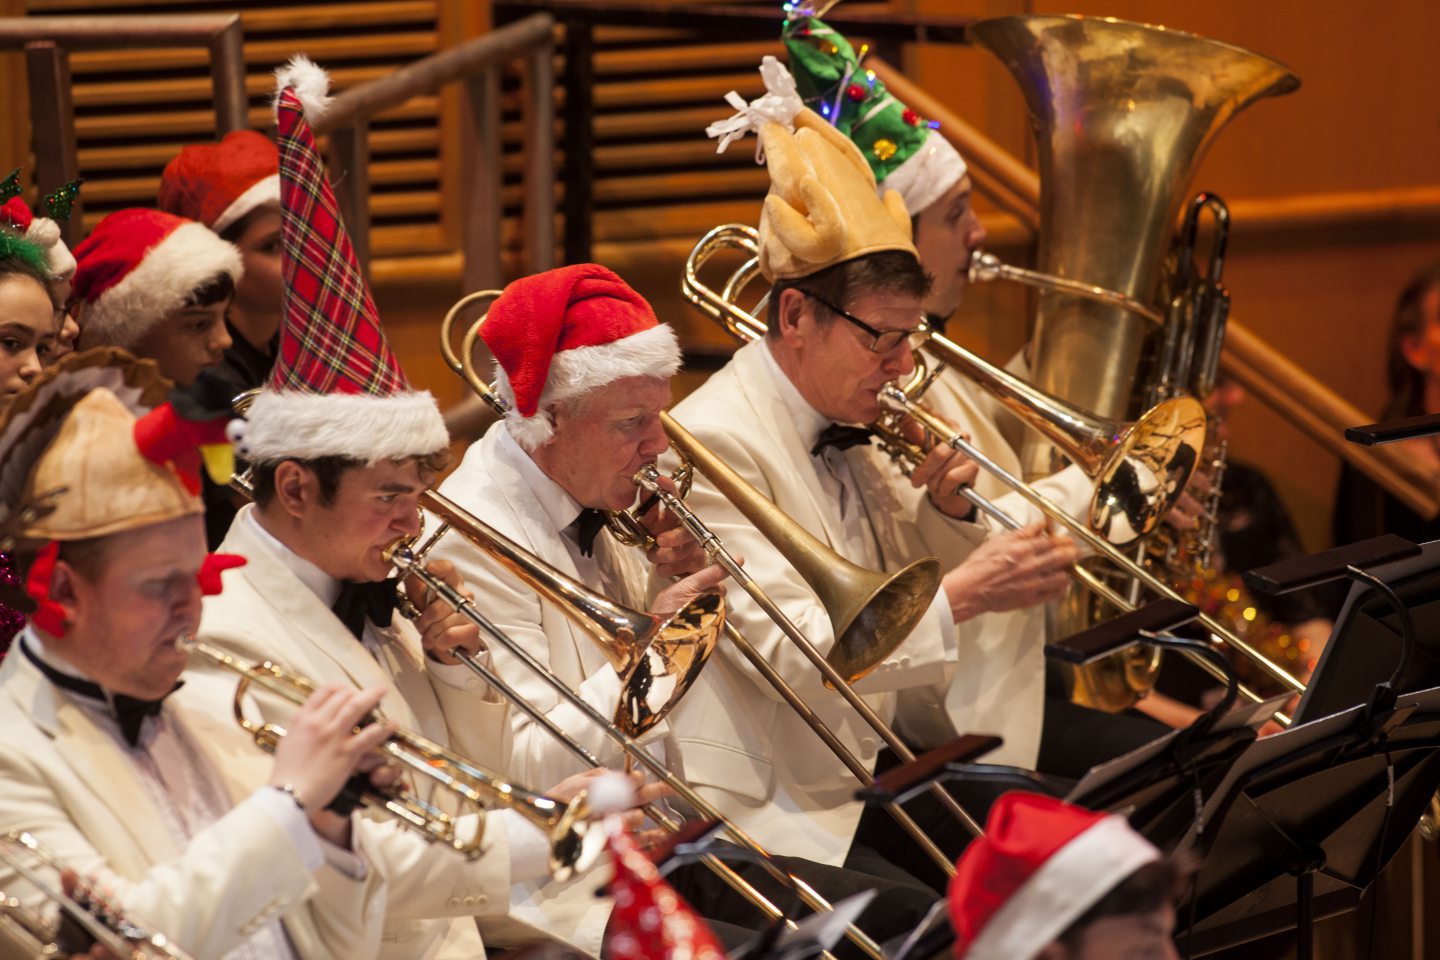 RSNO dressed up in festive headgear for Christmas concert